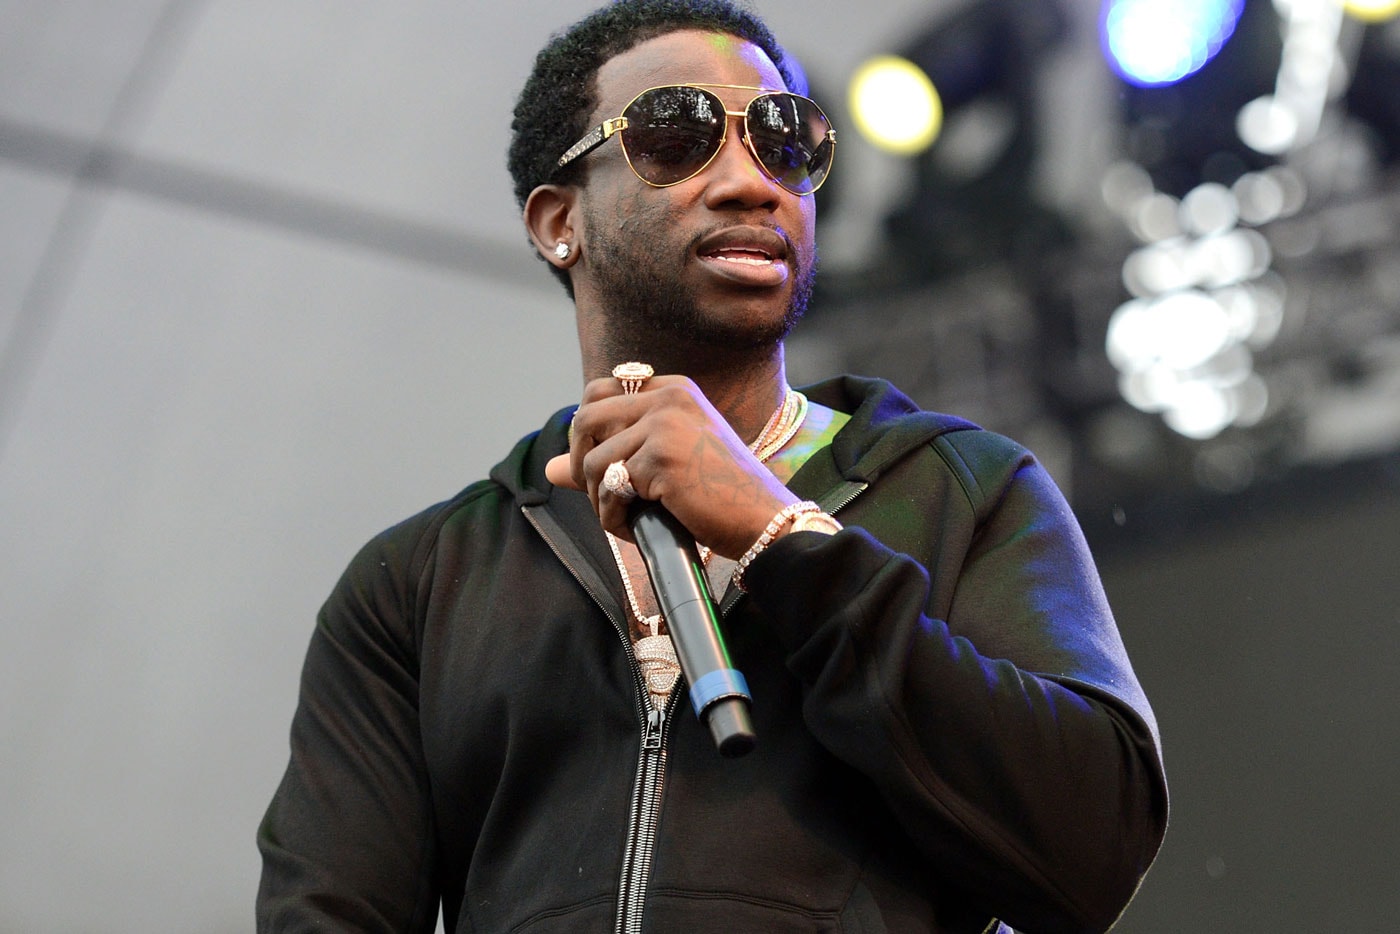 Gucci Mane Reacts to His Fans' "Sweet Tweets"